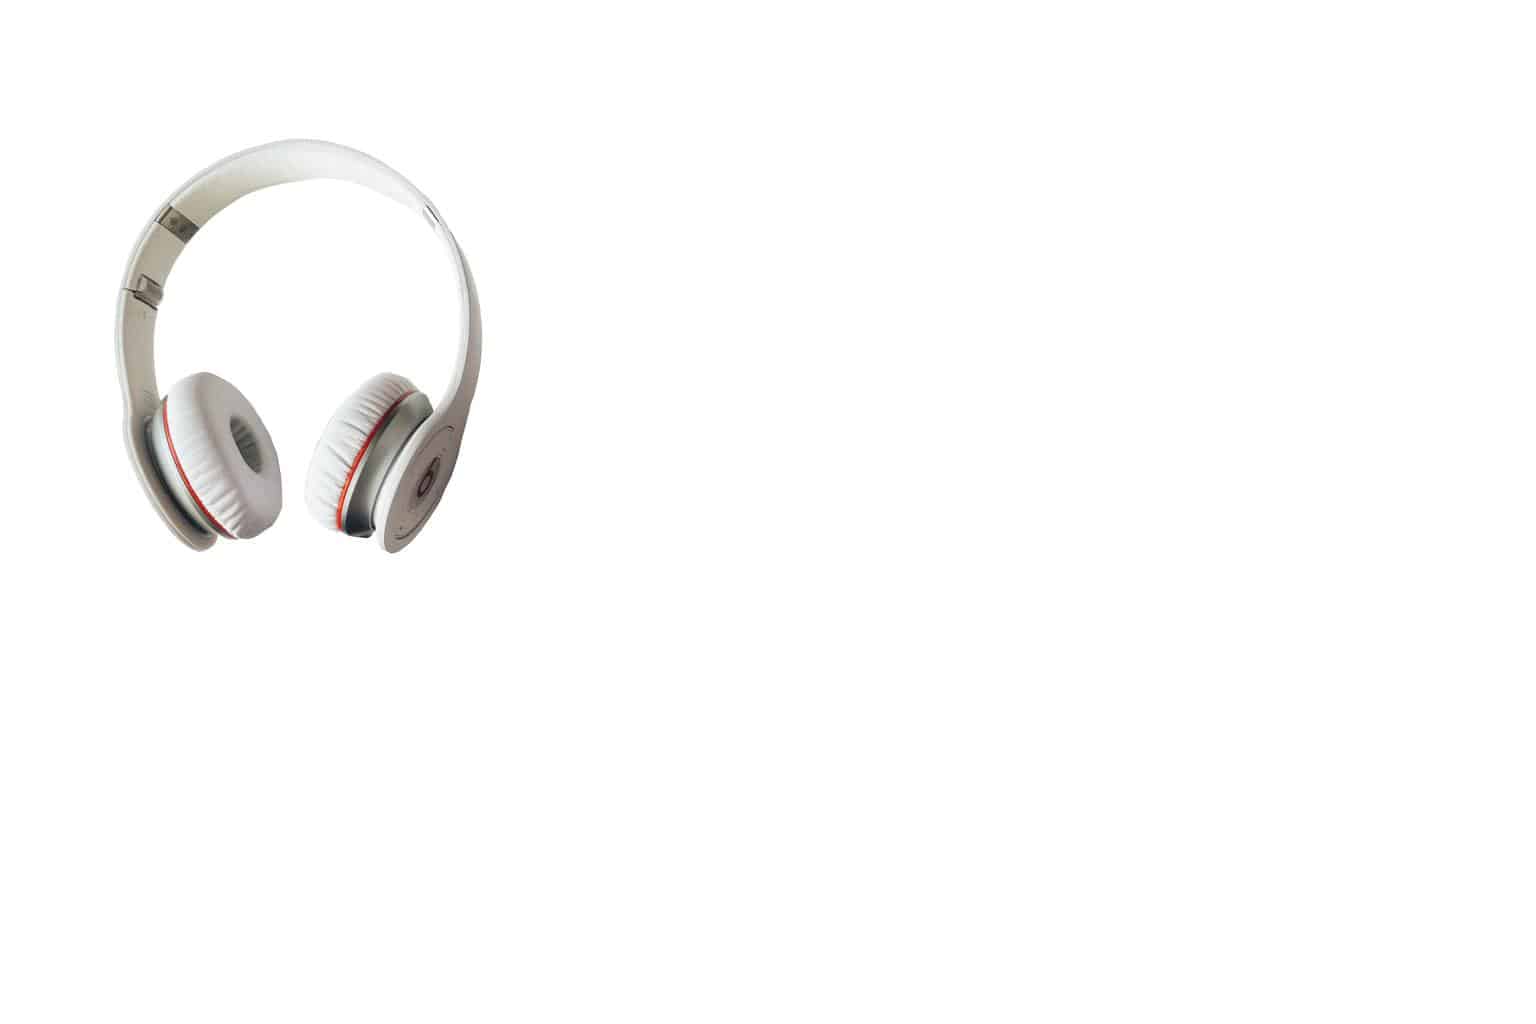 Pawn Beats Headphones - Get Fast Cash On 90 Day Loan